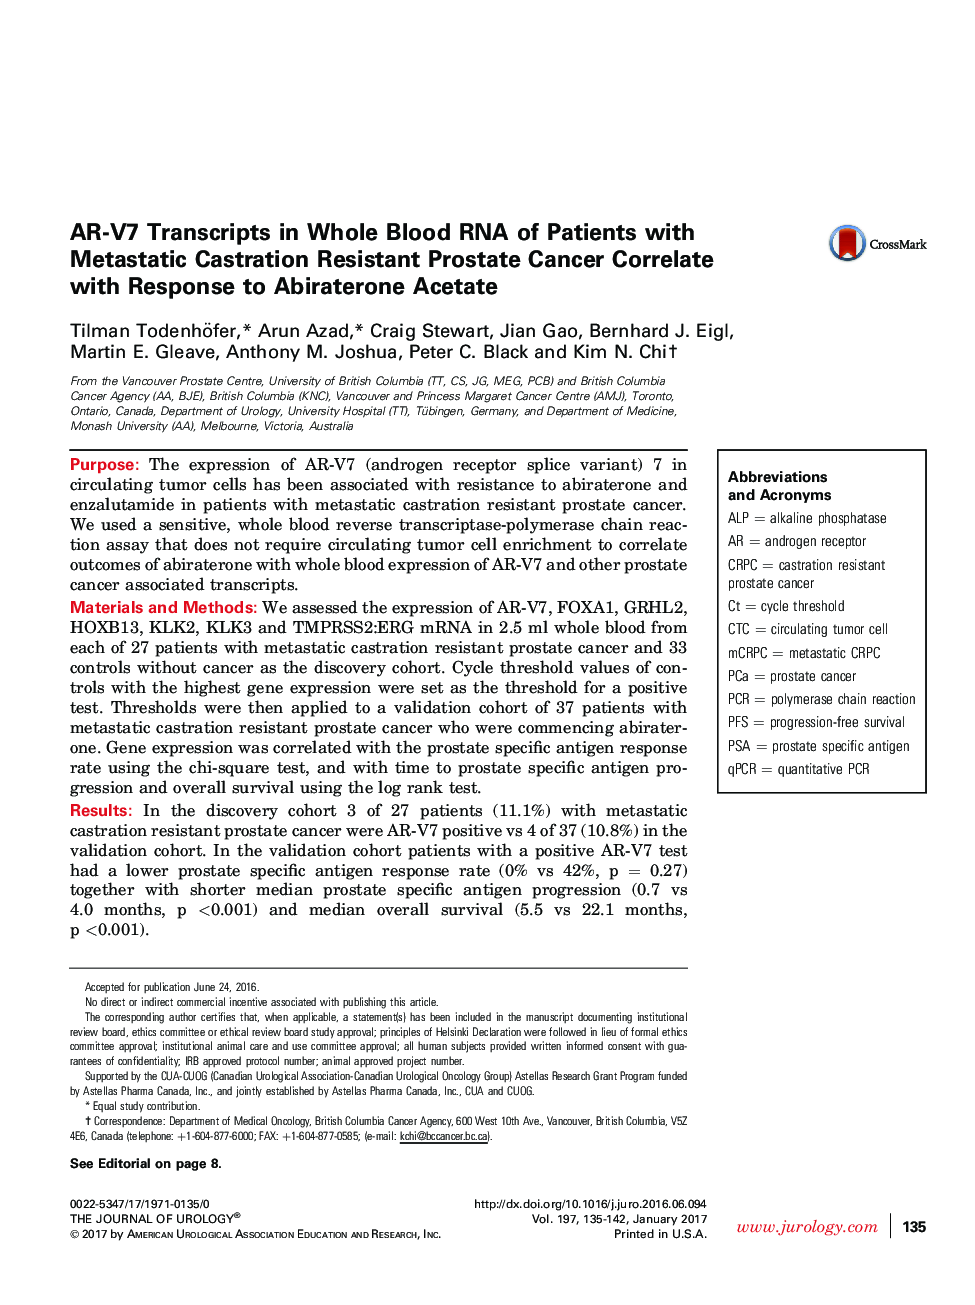 Adult UrologyOncology: Prostate/Testis/Penis/UrethraAR-V7 Transcripts in Whole Blood RNA of Patients with Metastatic Castration Resistant Prostate Cancer Correlate with Response to Abiraterone Acetate